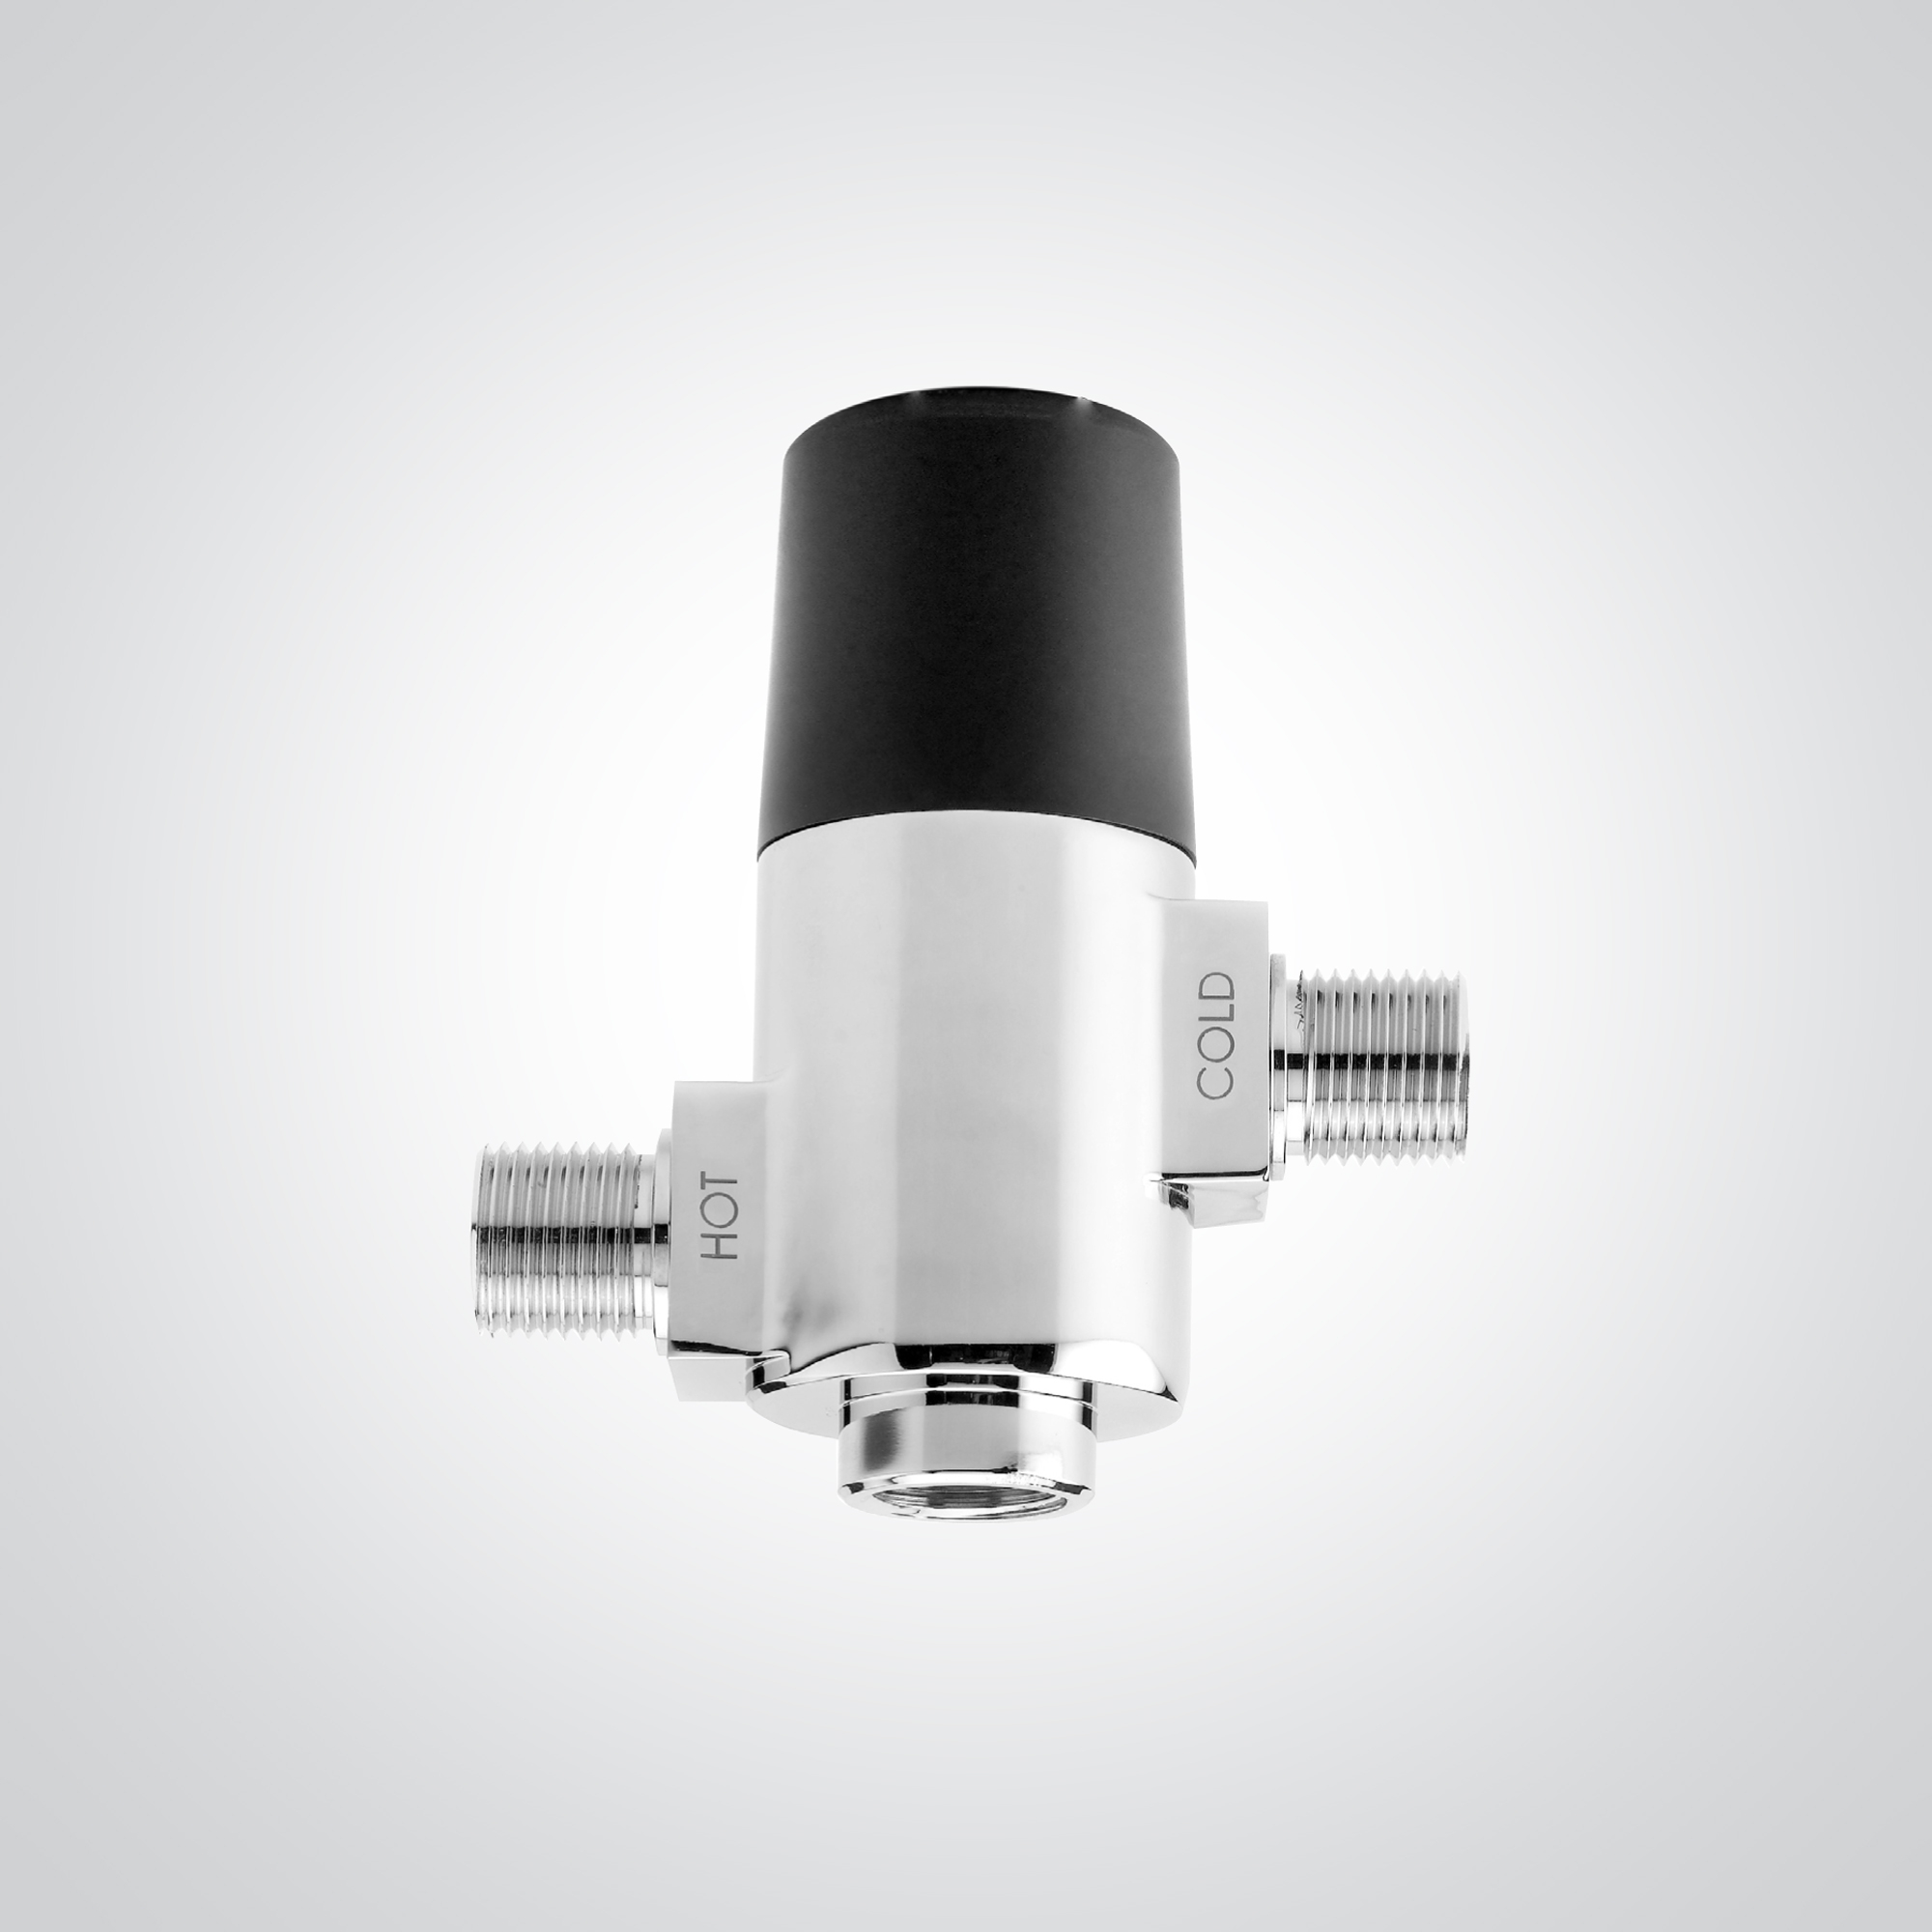 INTEGRATED THERMOSTATIC MIXING VALVE